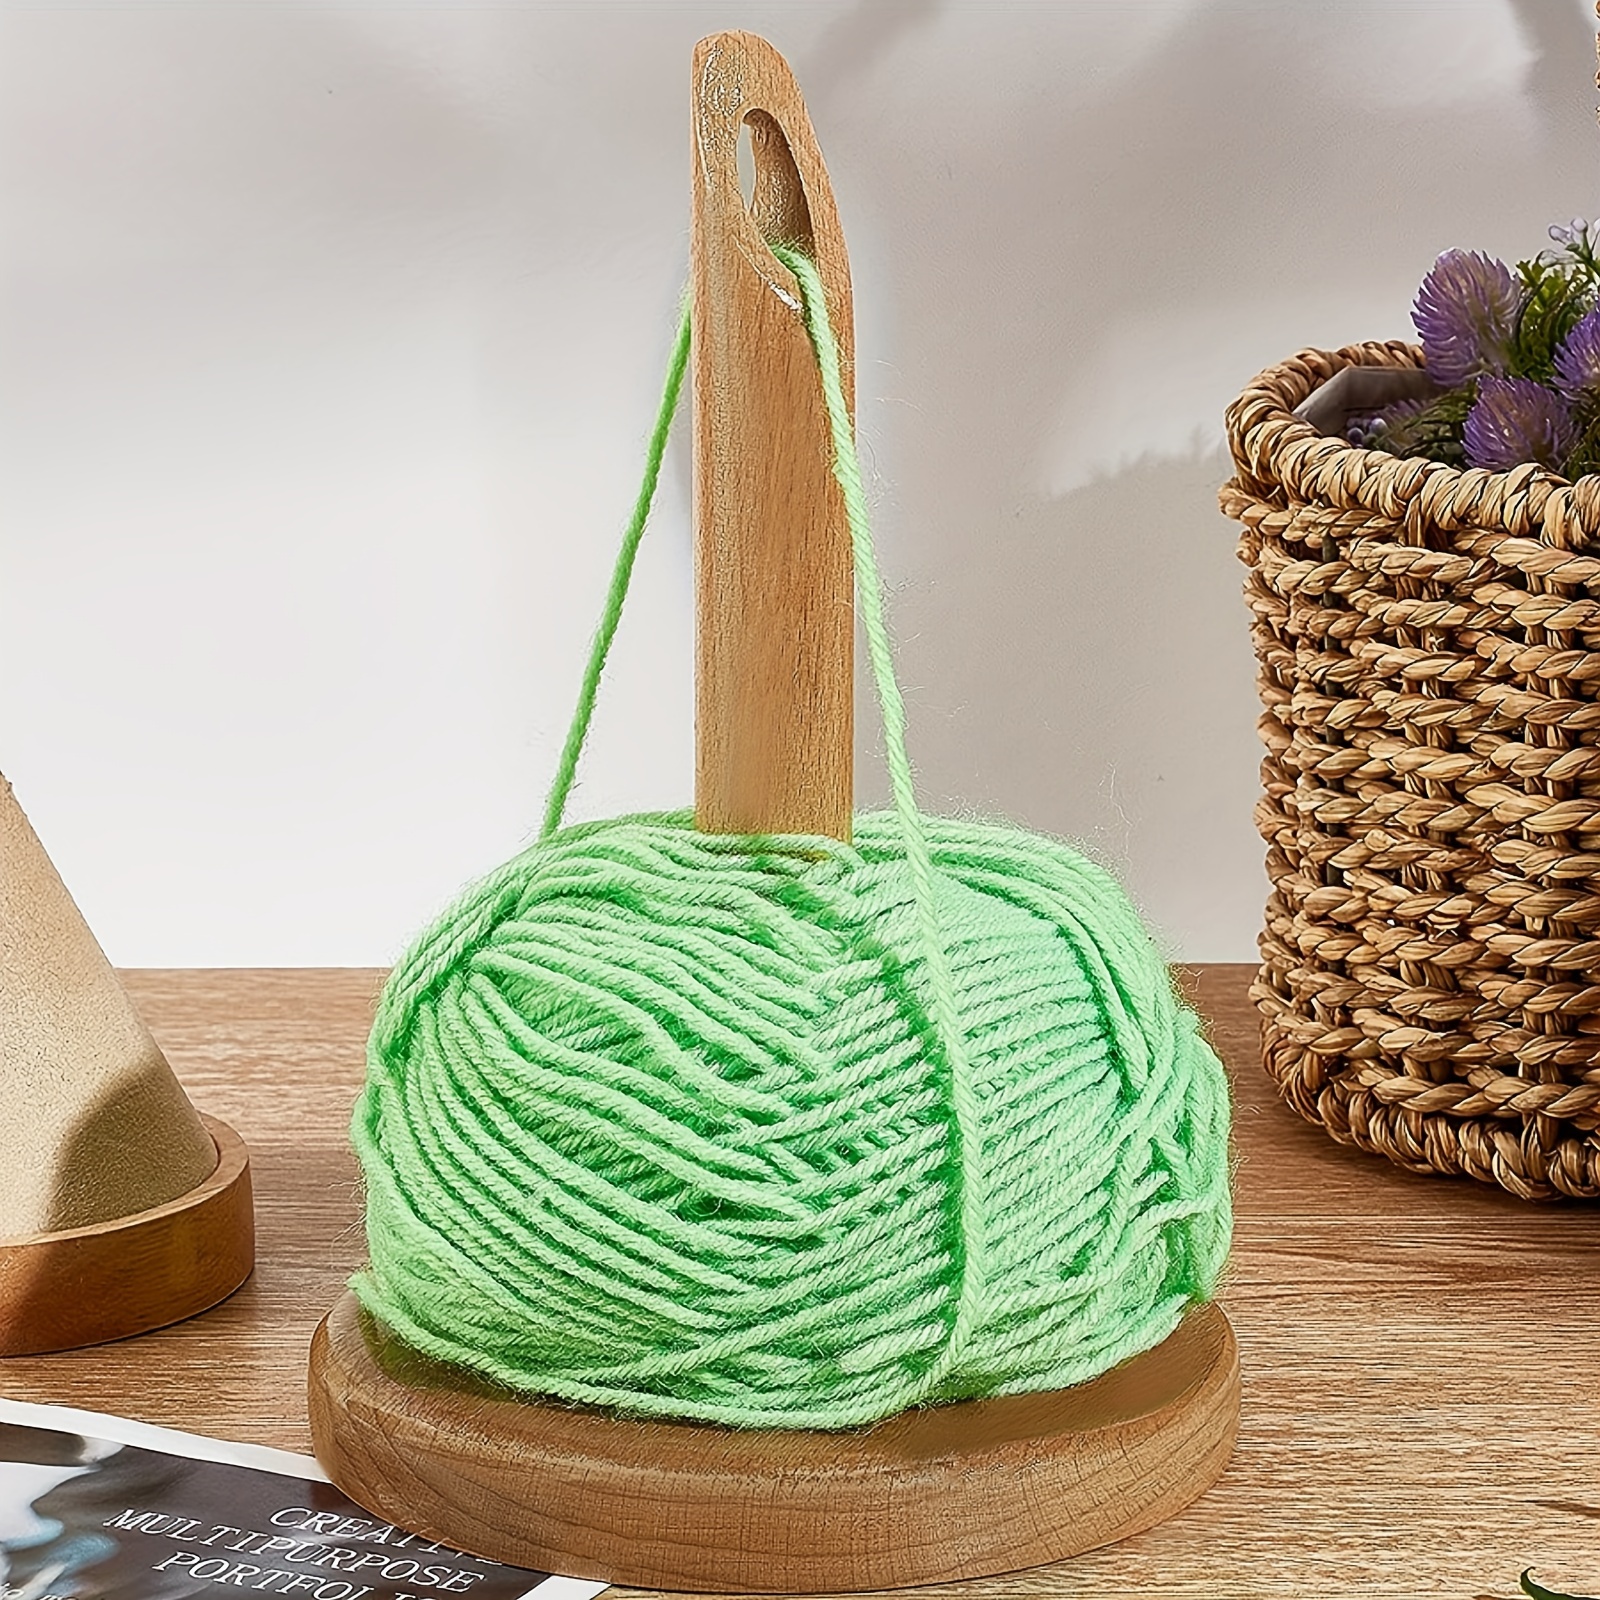 Portable Wrist Yarn Holder,Wooden Wrist Yarn Holder,Prevents Yarn Tangling  and Misalignment for Knitting Crocheting 